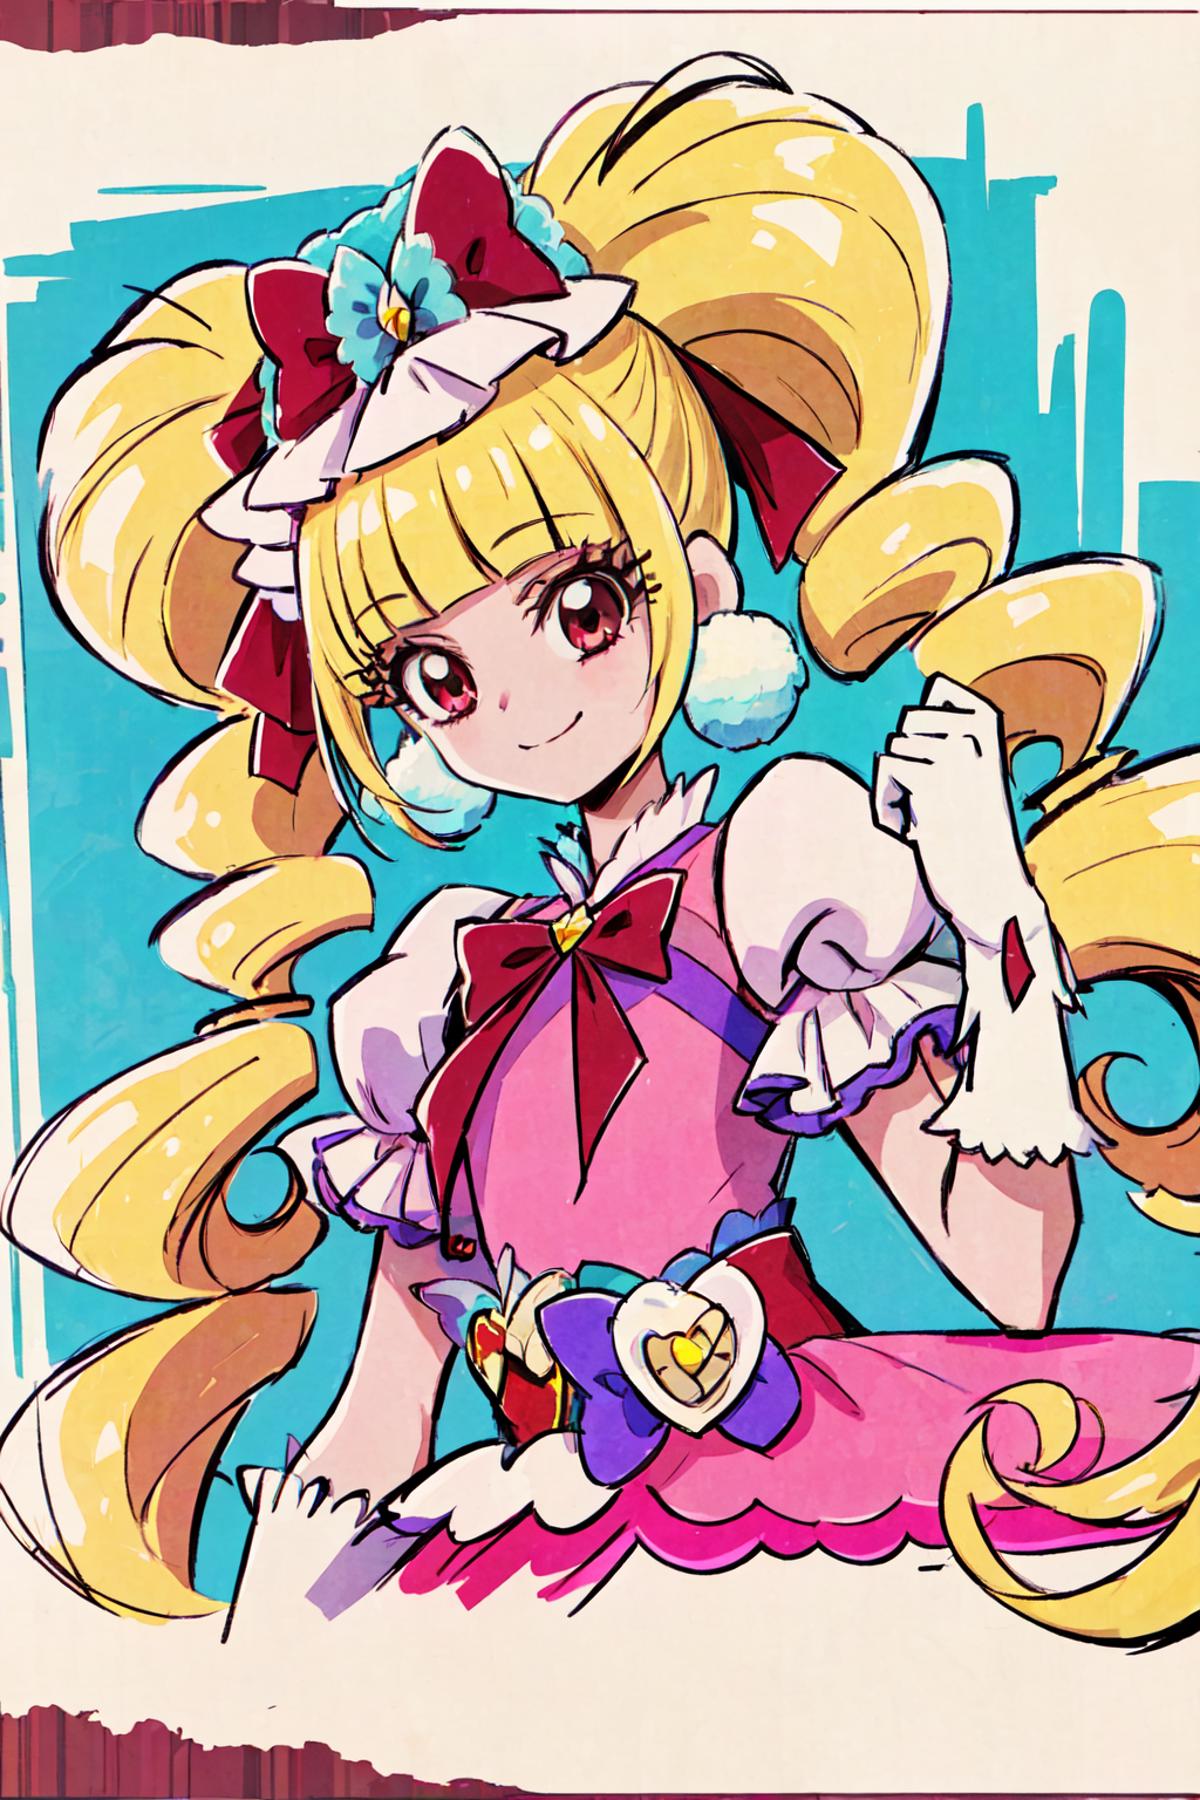 Cure Macherie (HUGtto! Pretty Cure) HUGっと！プリキュア キュアマシェリ image by UnknownNo3